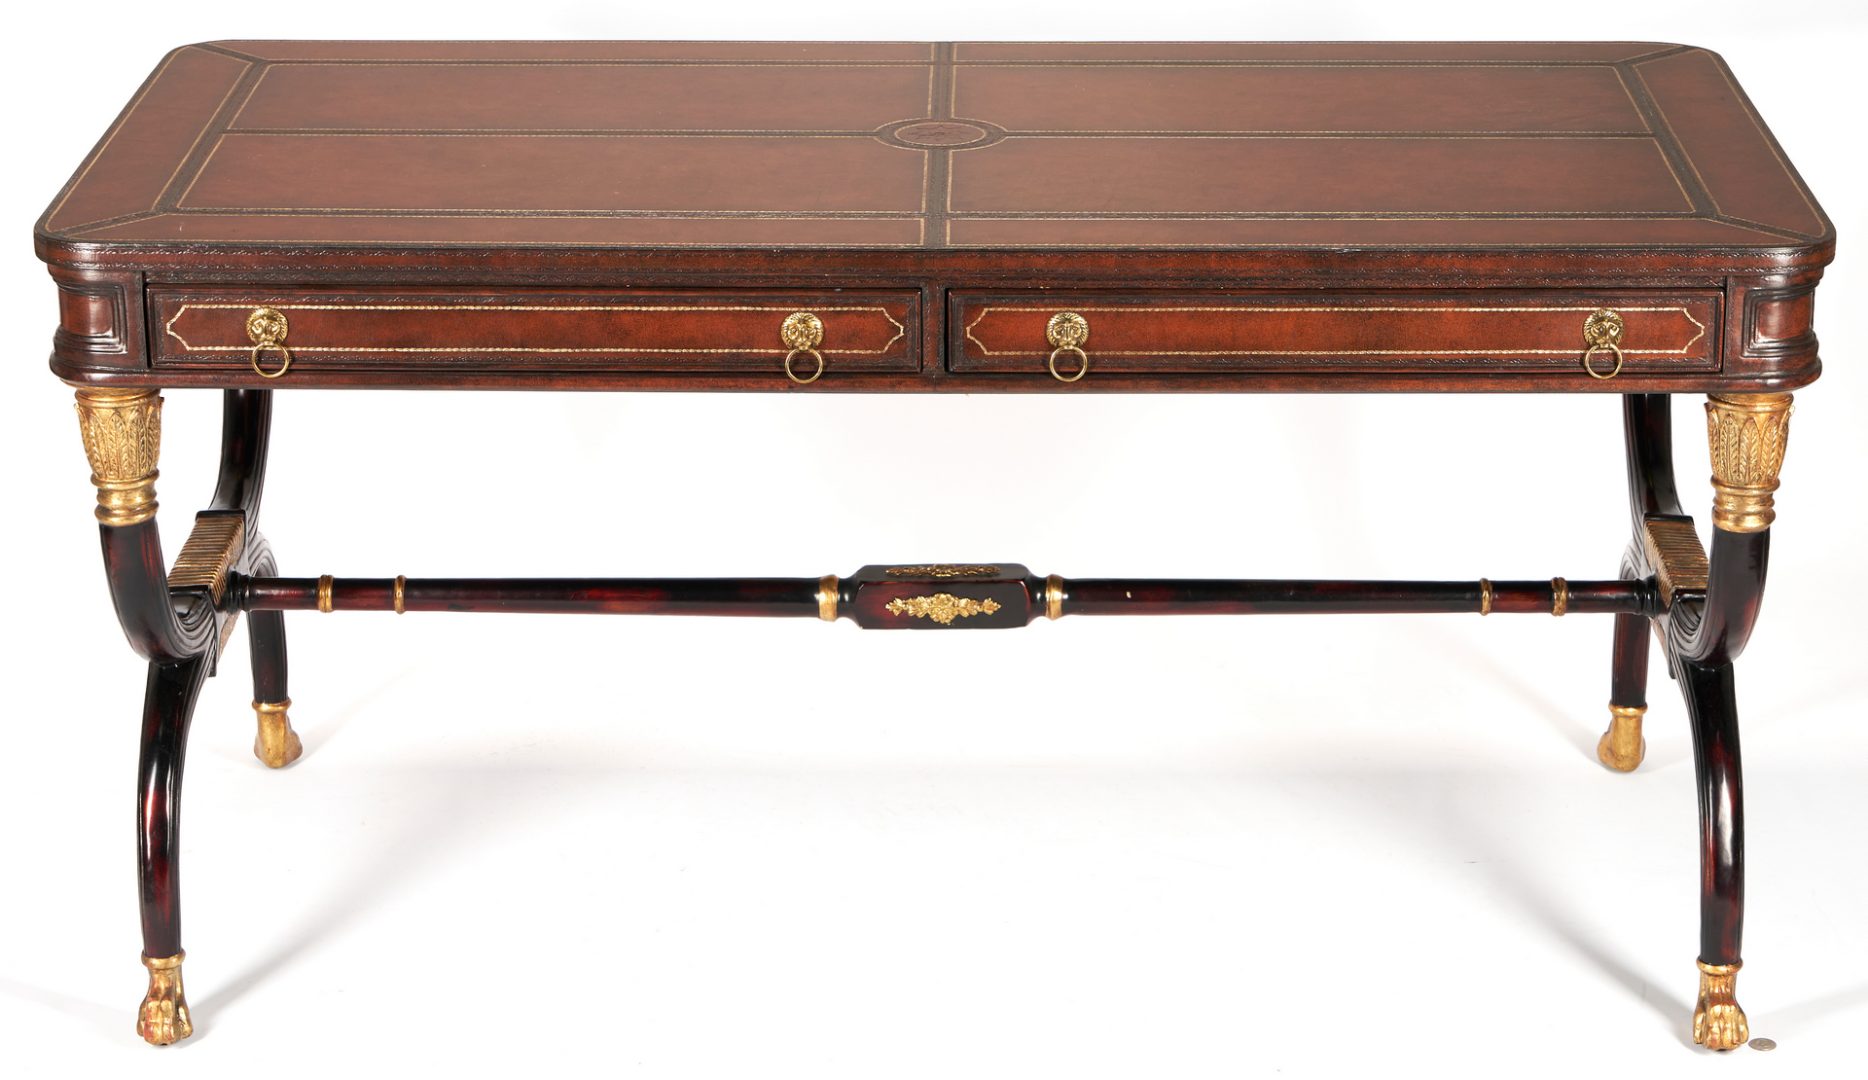 Lot 132: Maitland Smith French Empire Style Desk or Writing Table